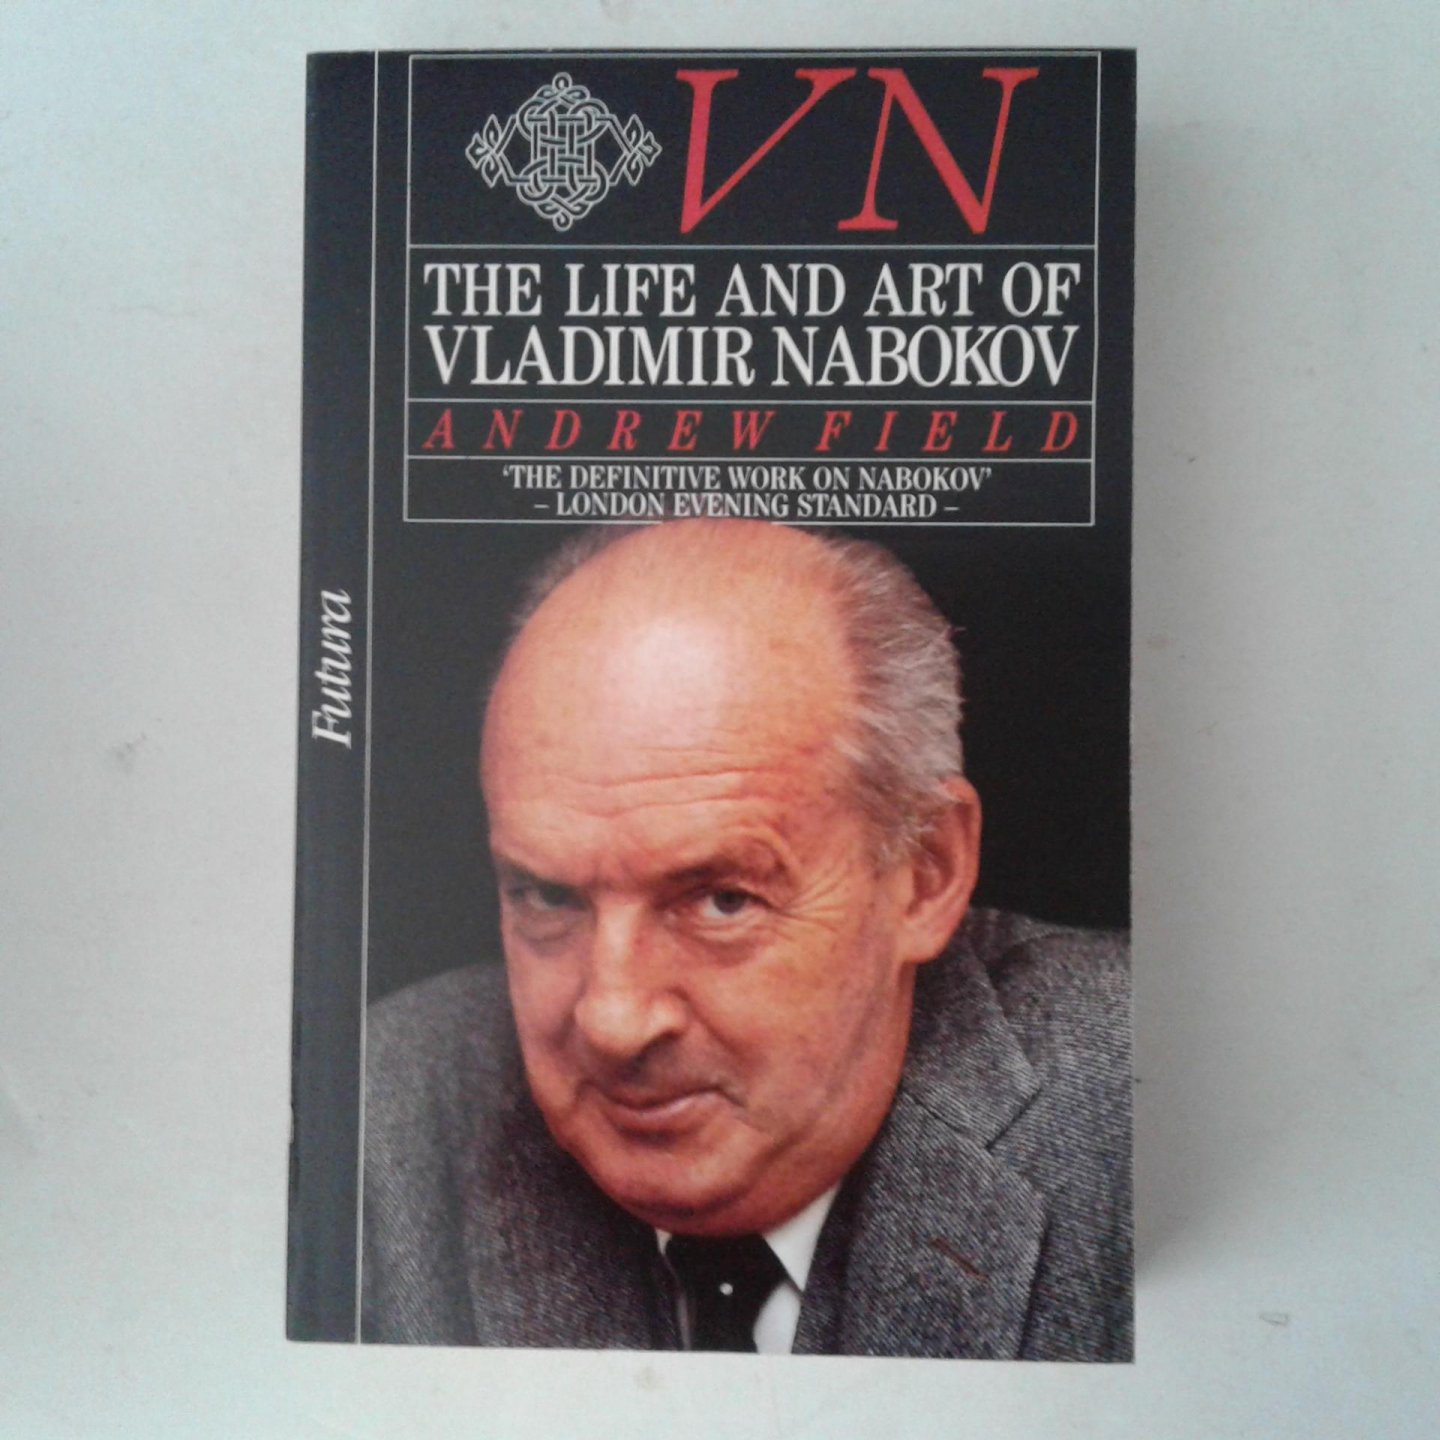 Field, Andrew - VN, the Life and Art of Vladimir Nabokov